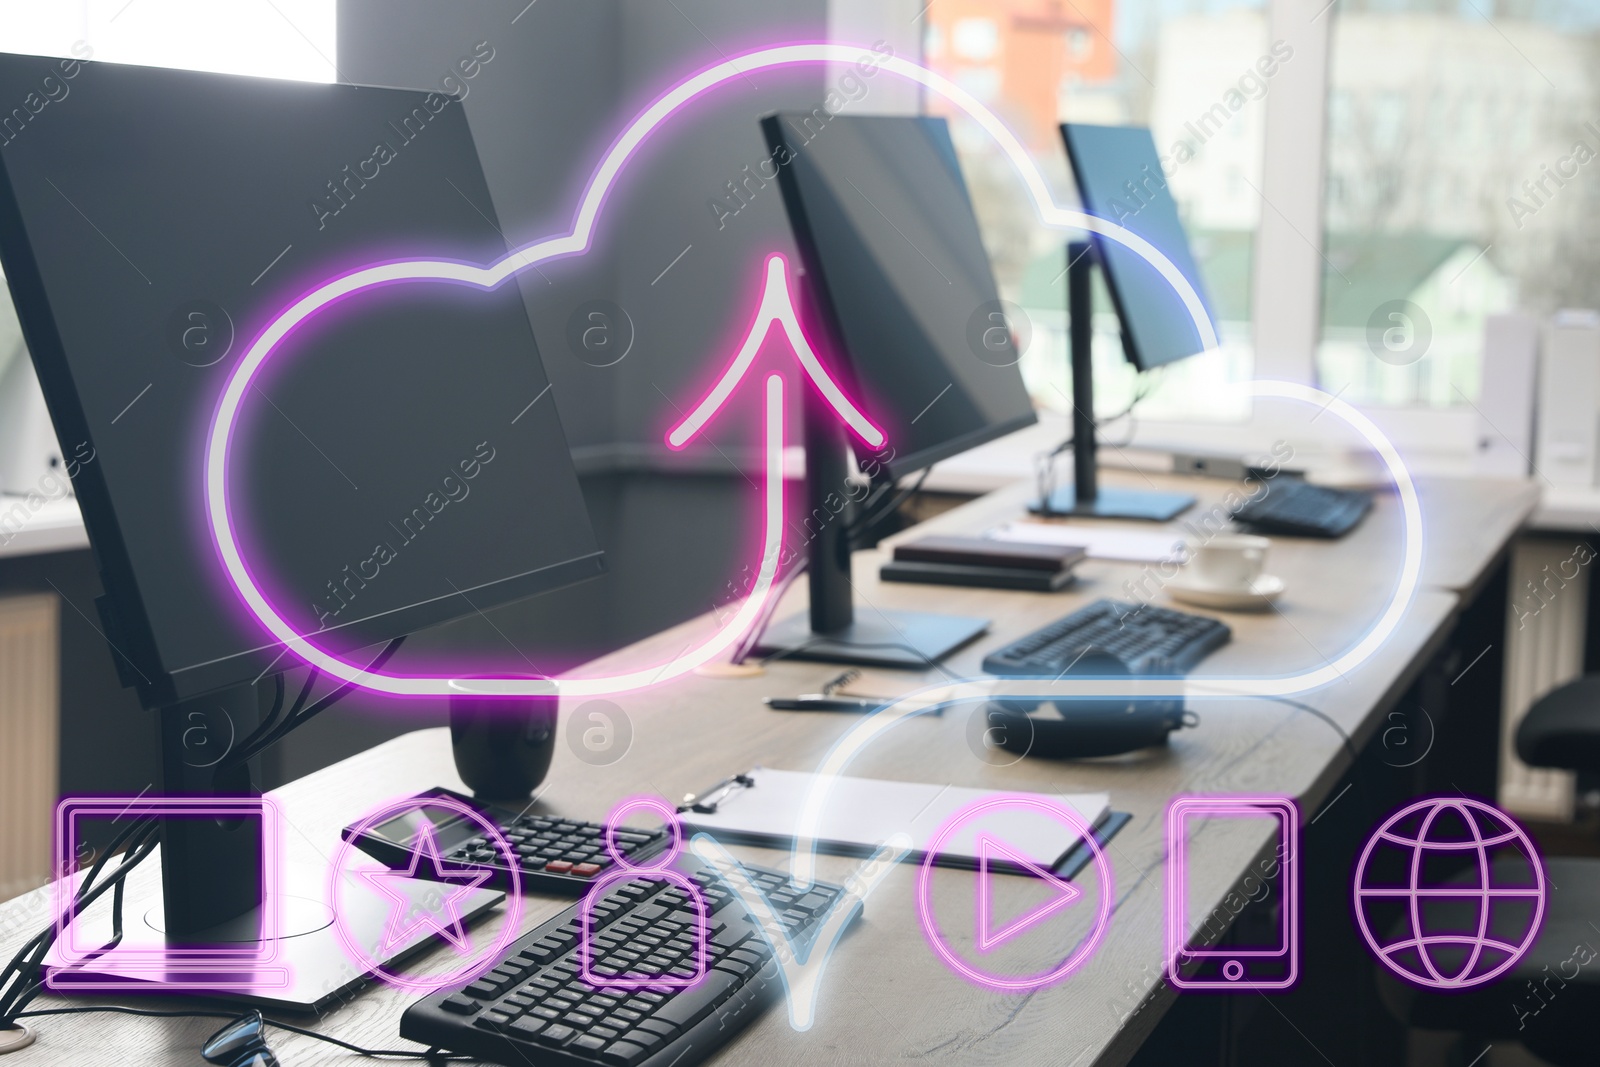 Image of Web hosting. Digital neon cloud with icons and office with computers on background